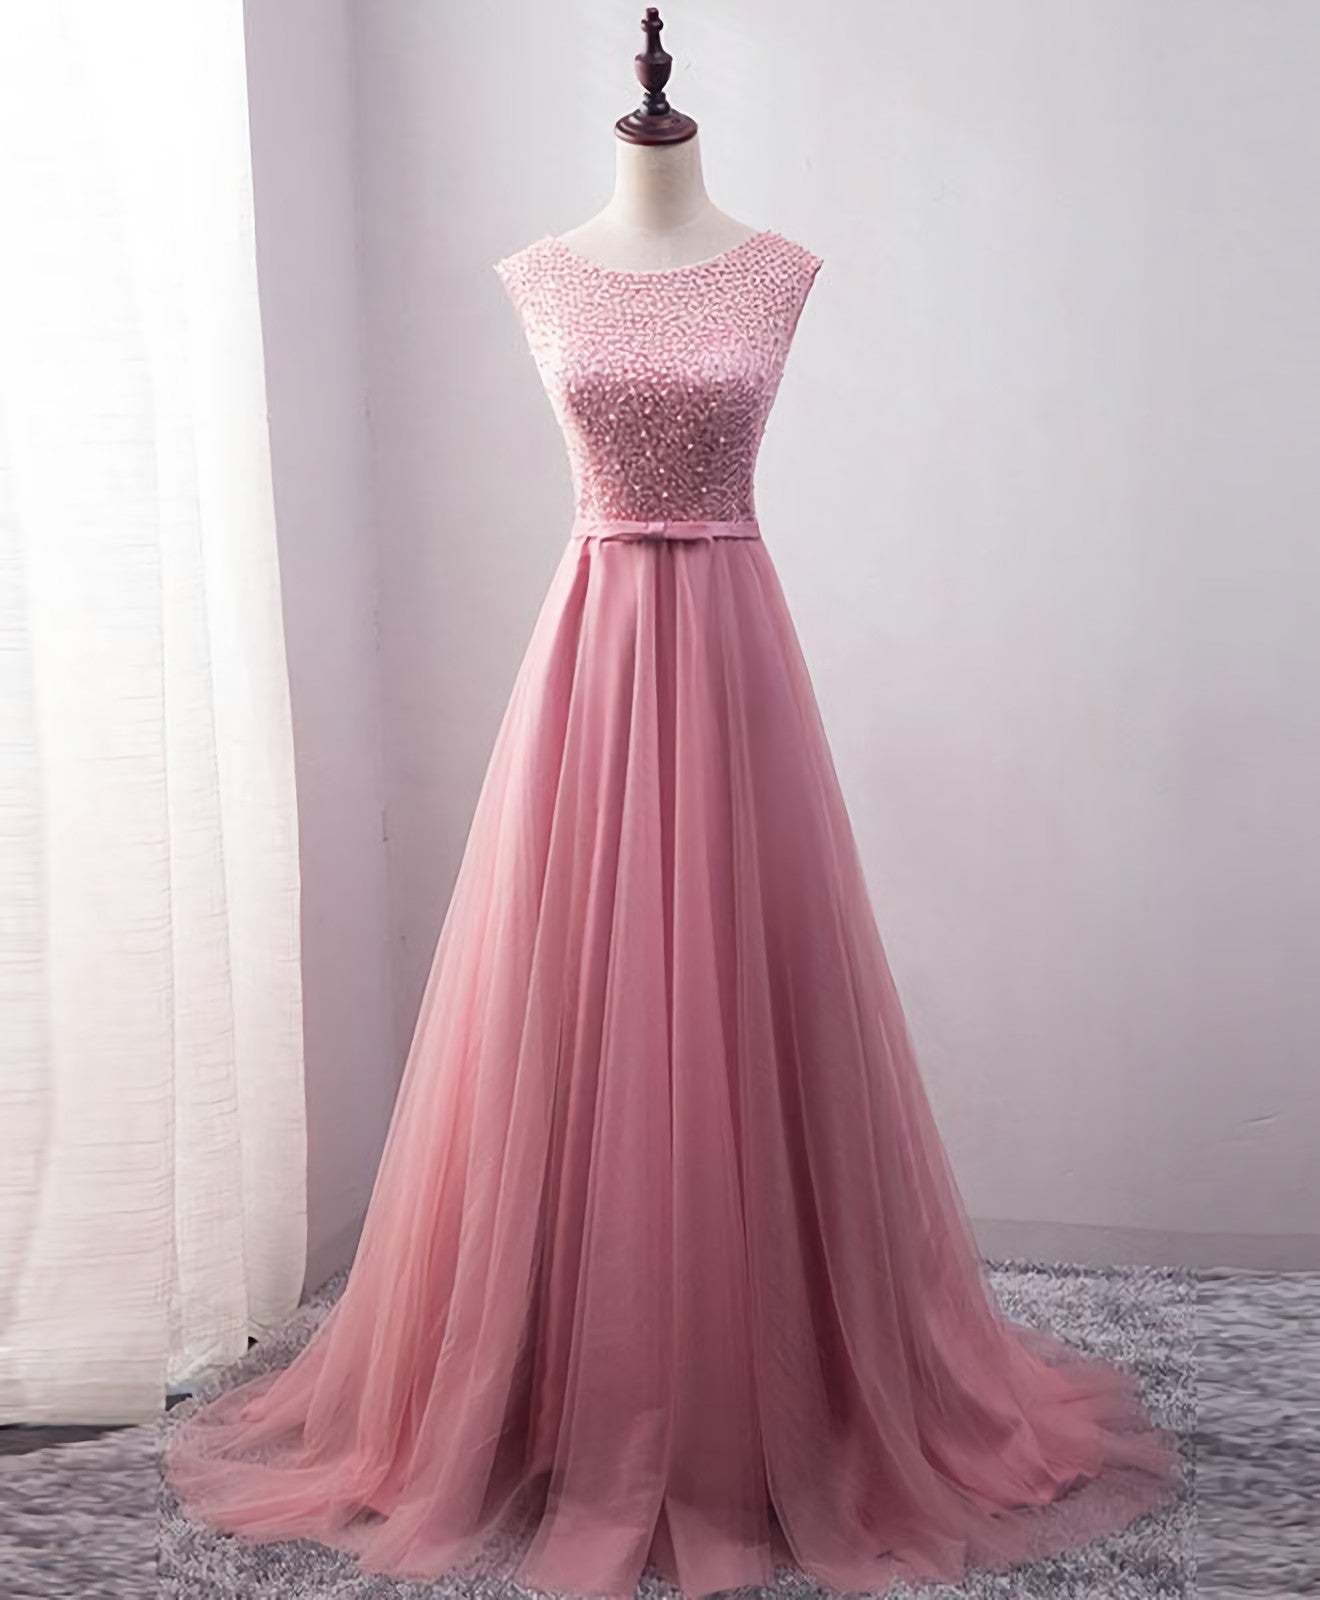 Pink Tulle Long A Line Corset Prom Dress, Pink Evening Dress outfit, Homecomeing Dresses Short